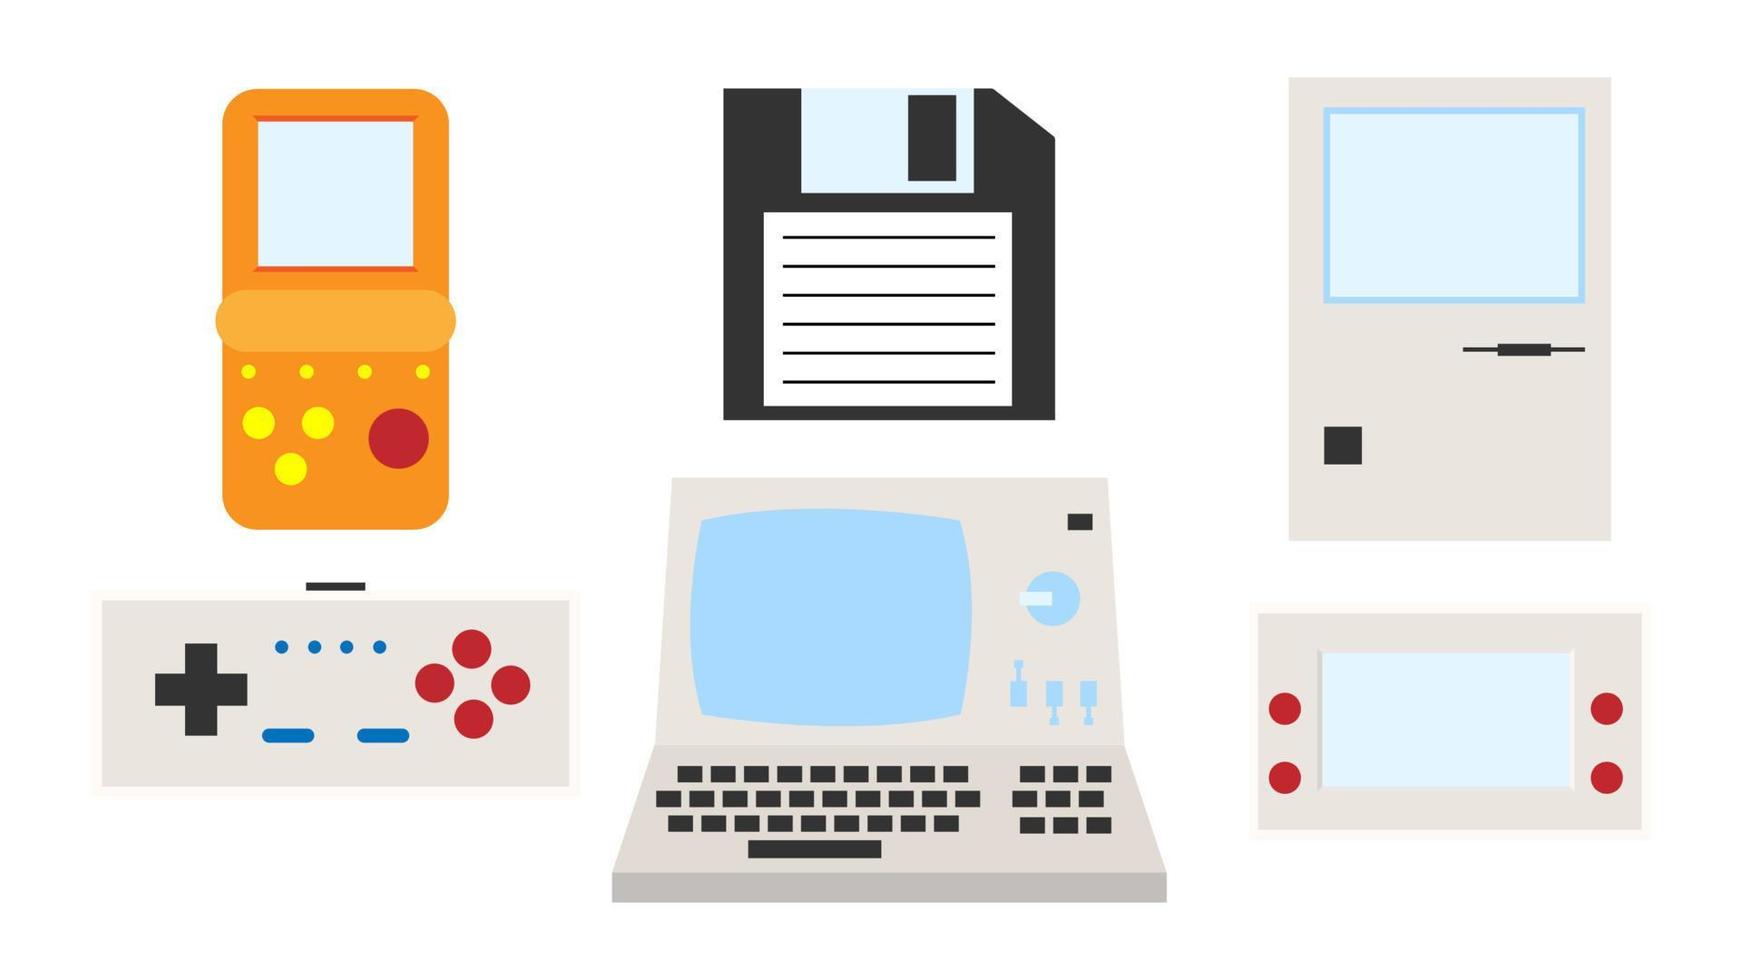 Set of old retro vintage hipster technology electronics computer, pc, floppy floppy disk, game portable video game consoles from 70s, 80s, 90s. Vector illustration